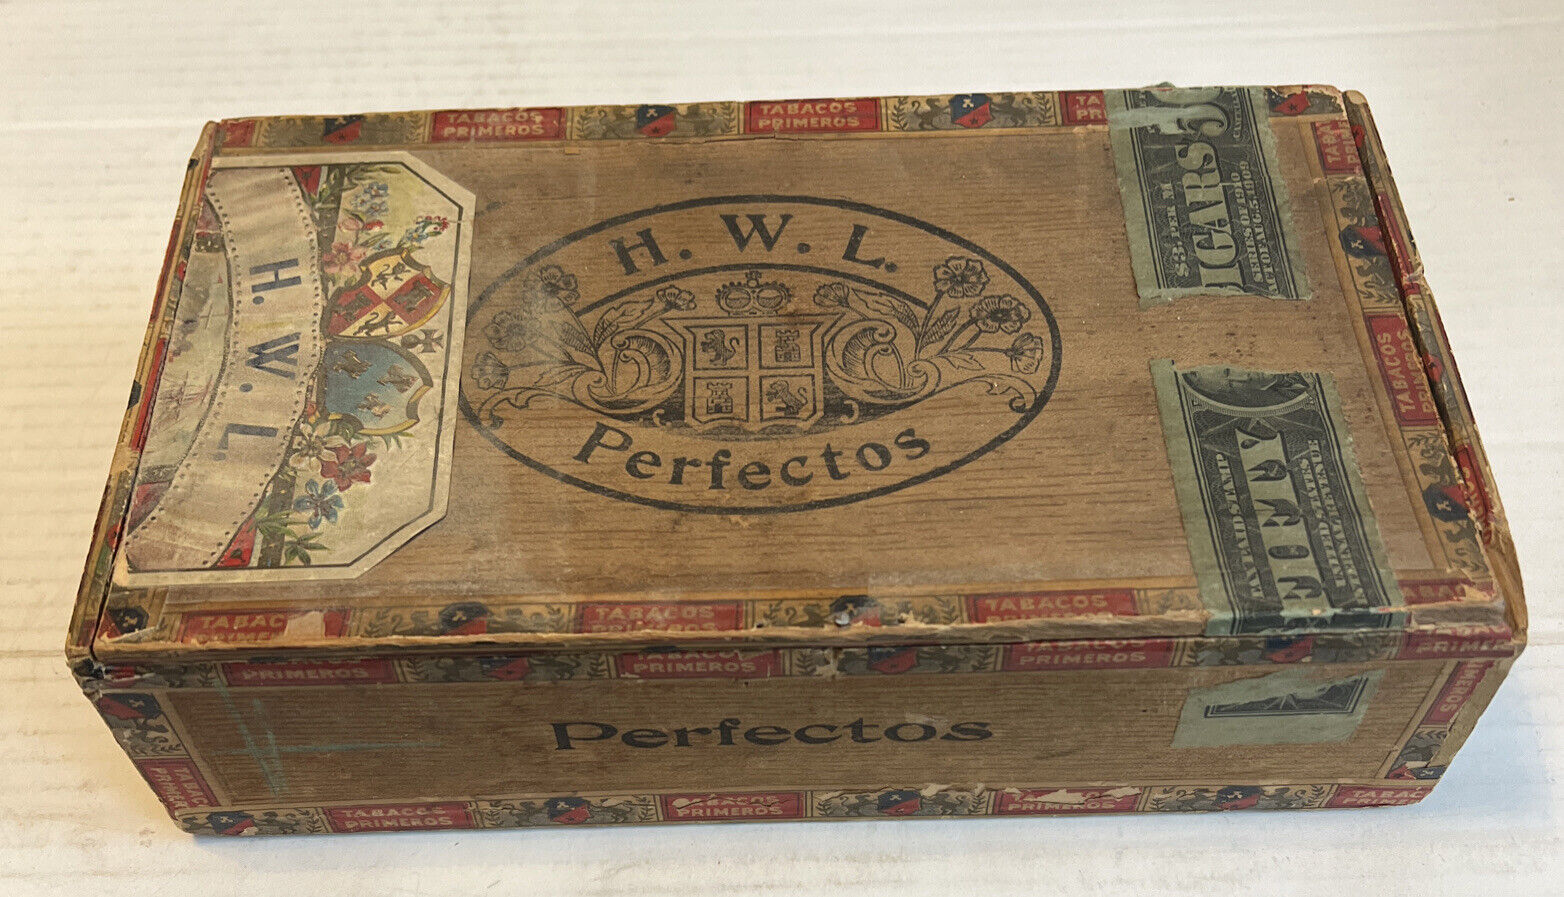 H.W.L. Perfectos Series of 1910 Tax Stamp Factory 294 9th Dist. PA. Antique